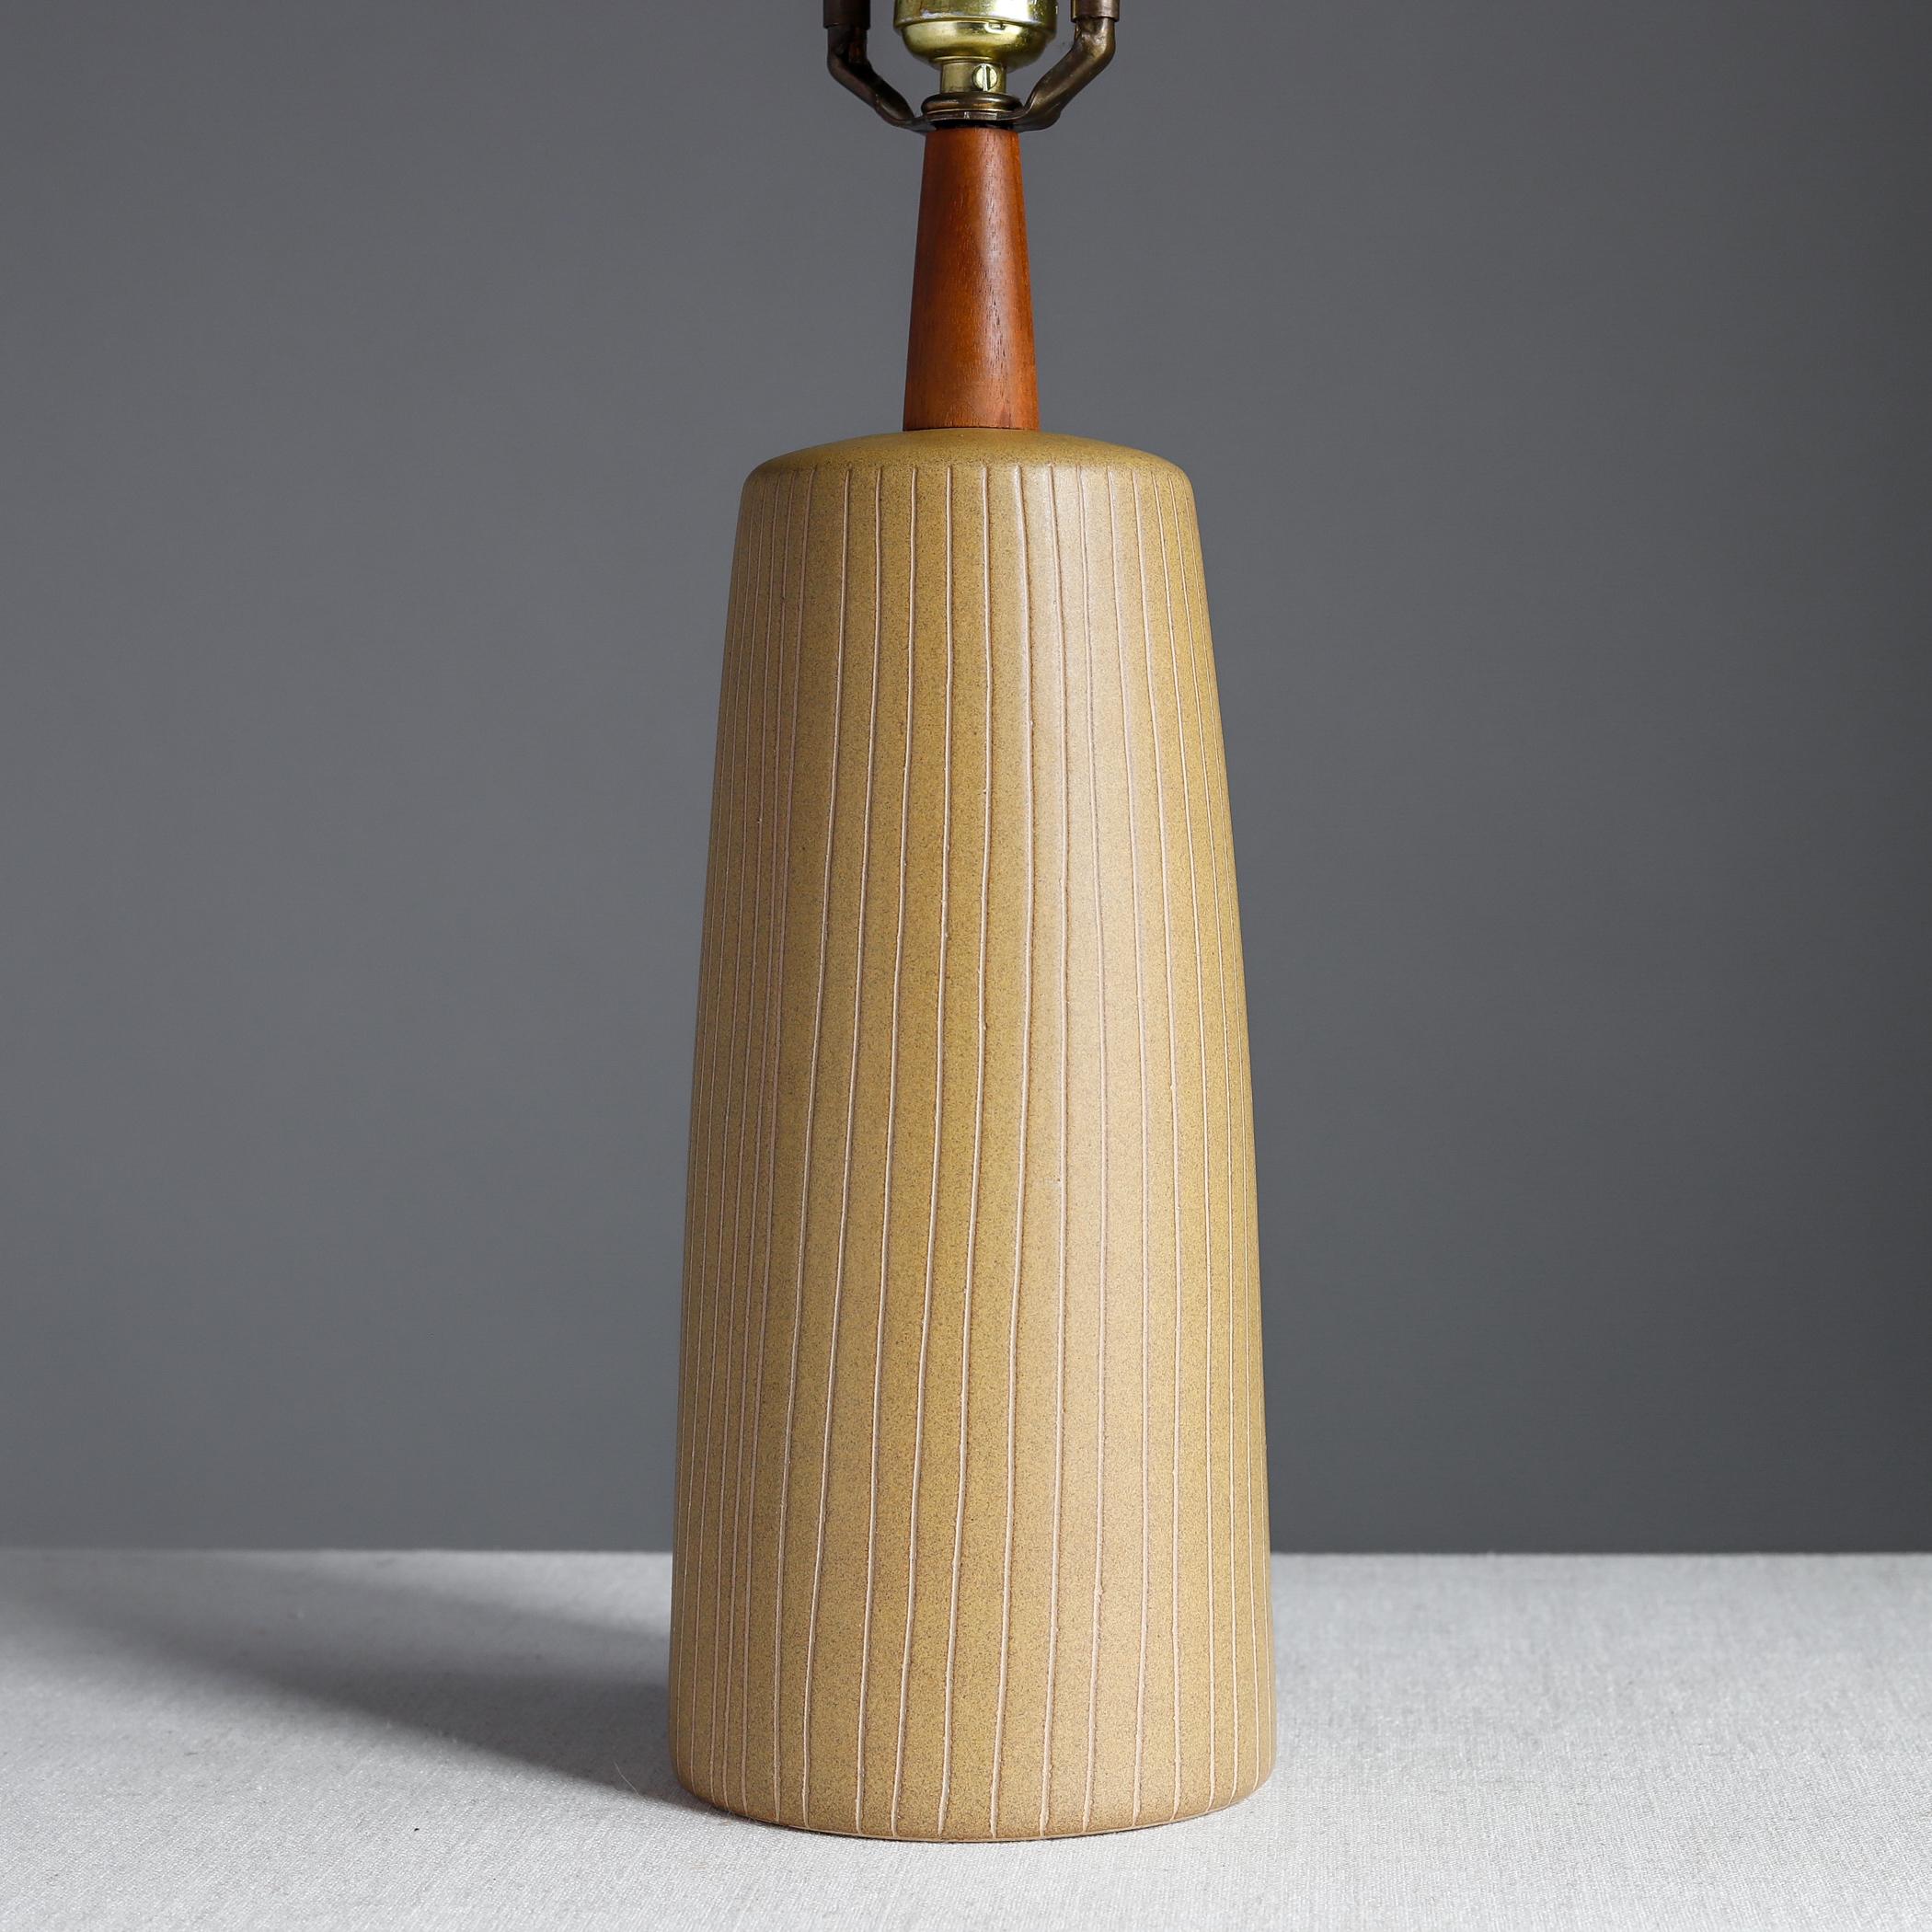 Midcentury ceramic table lamp designed by Jane and Gordon Martz for Marshall Studios of Indiana. The stoneware body has a warm mustard-y glaze with hand-incised vertical lines, mounted with a walnut neck and with original walnut finial. Signed